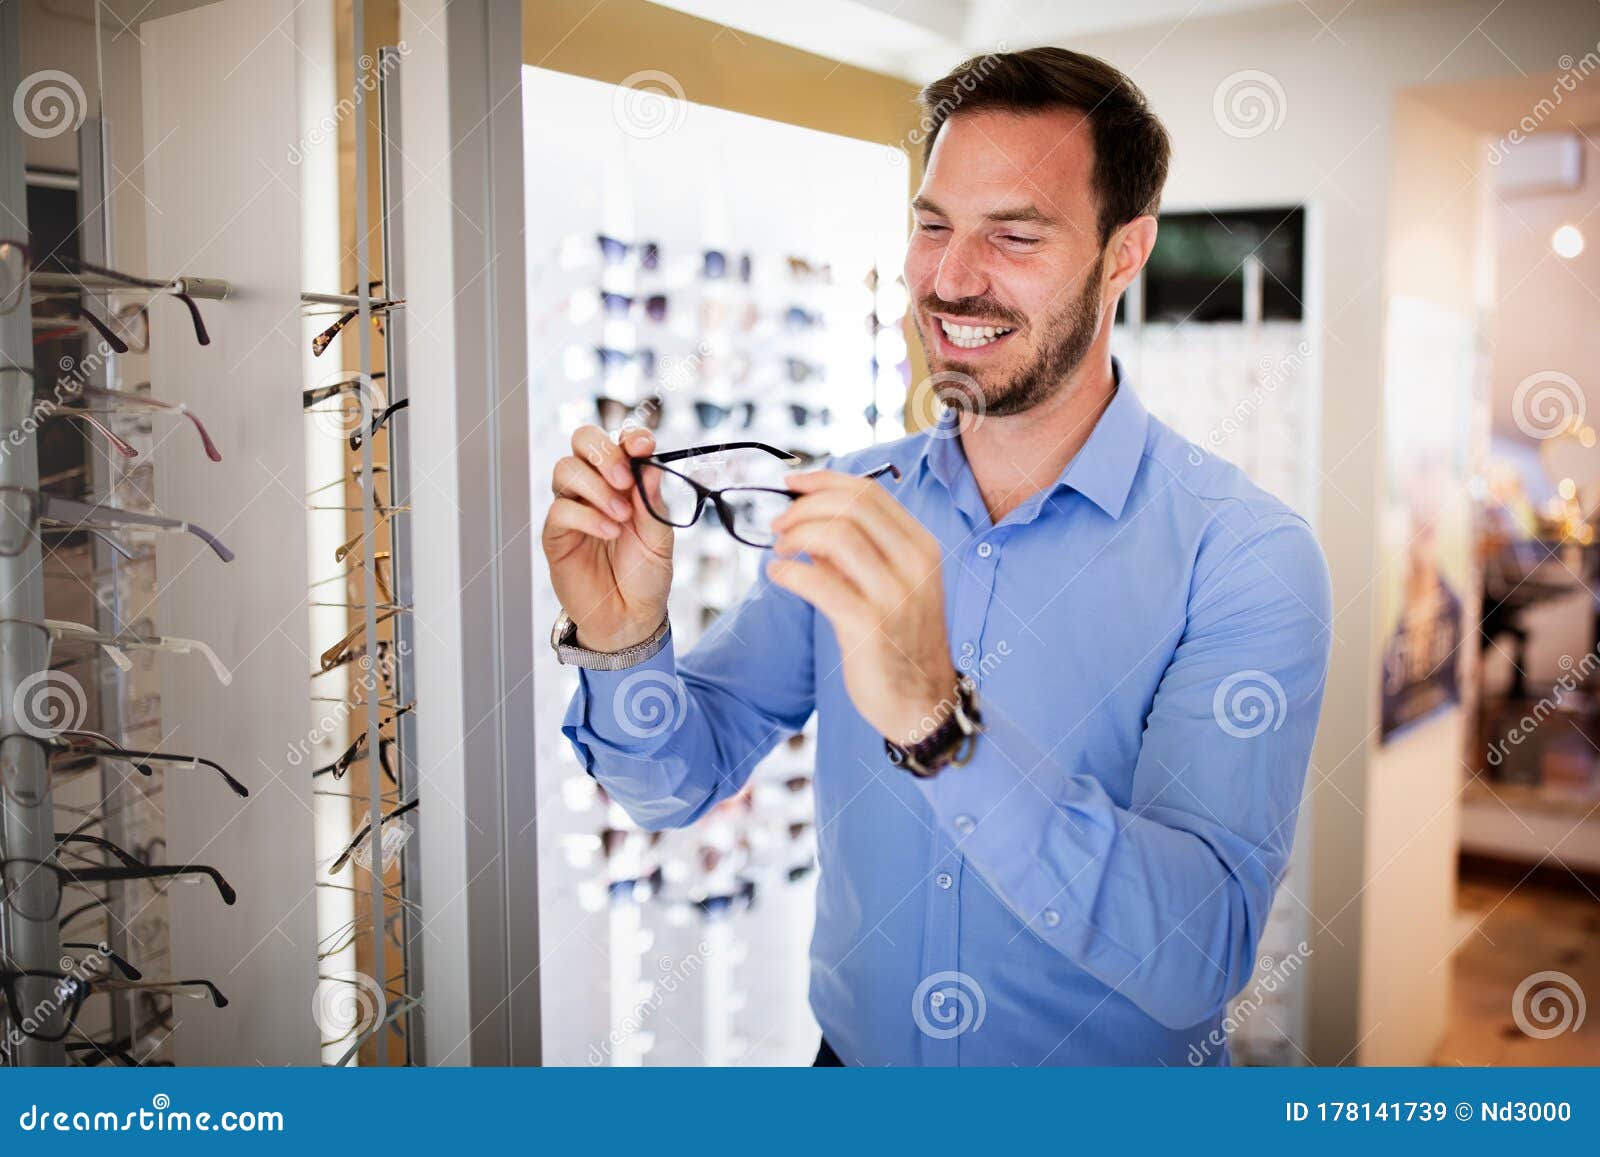 Health Care, Eyesight and Vision Concept - Happy Man Choosing Glasses ...